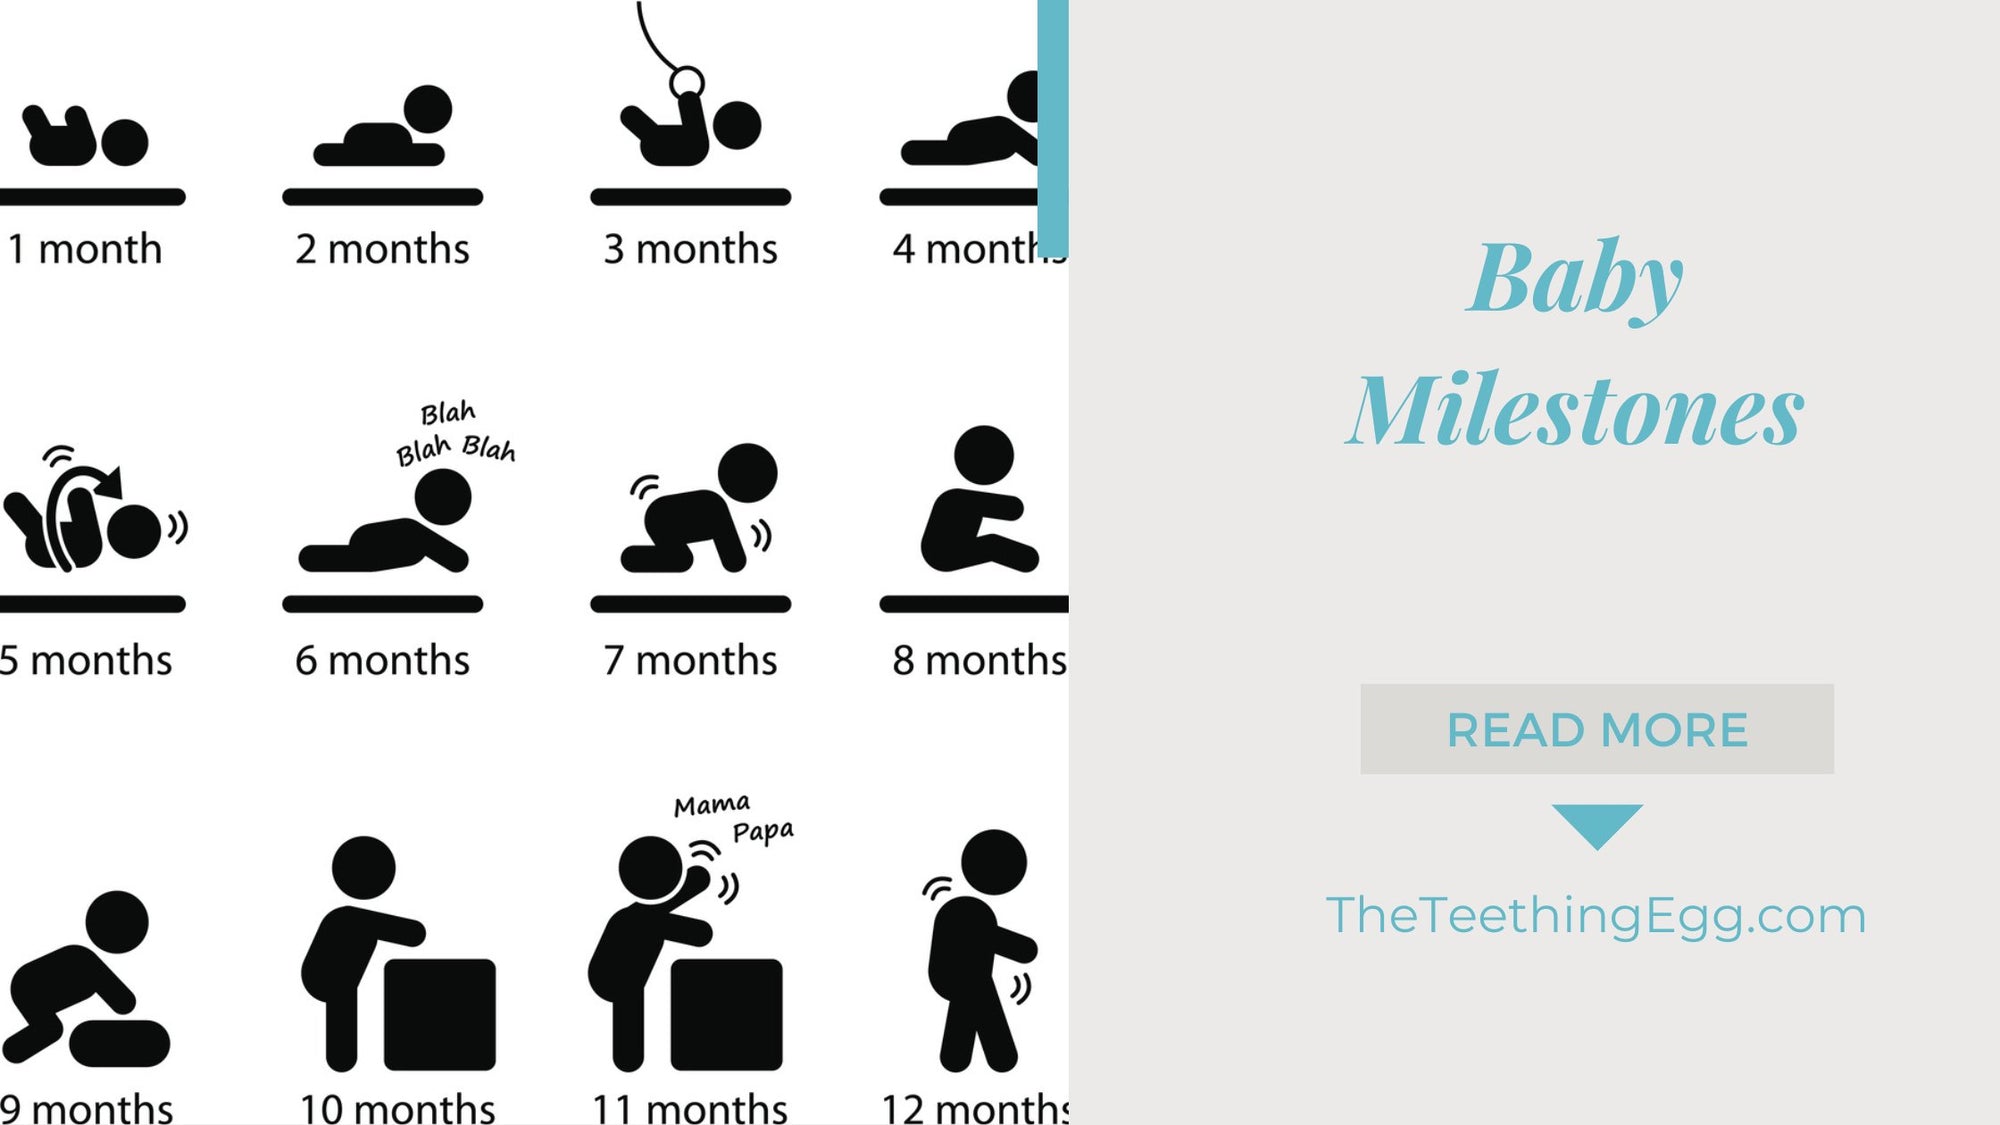 Baby Milestones: Tracking Your Little One's Development Month by Month